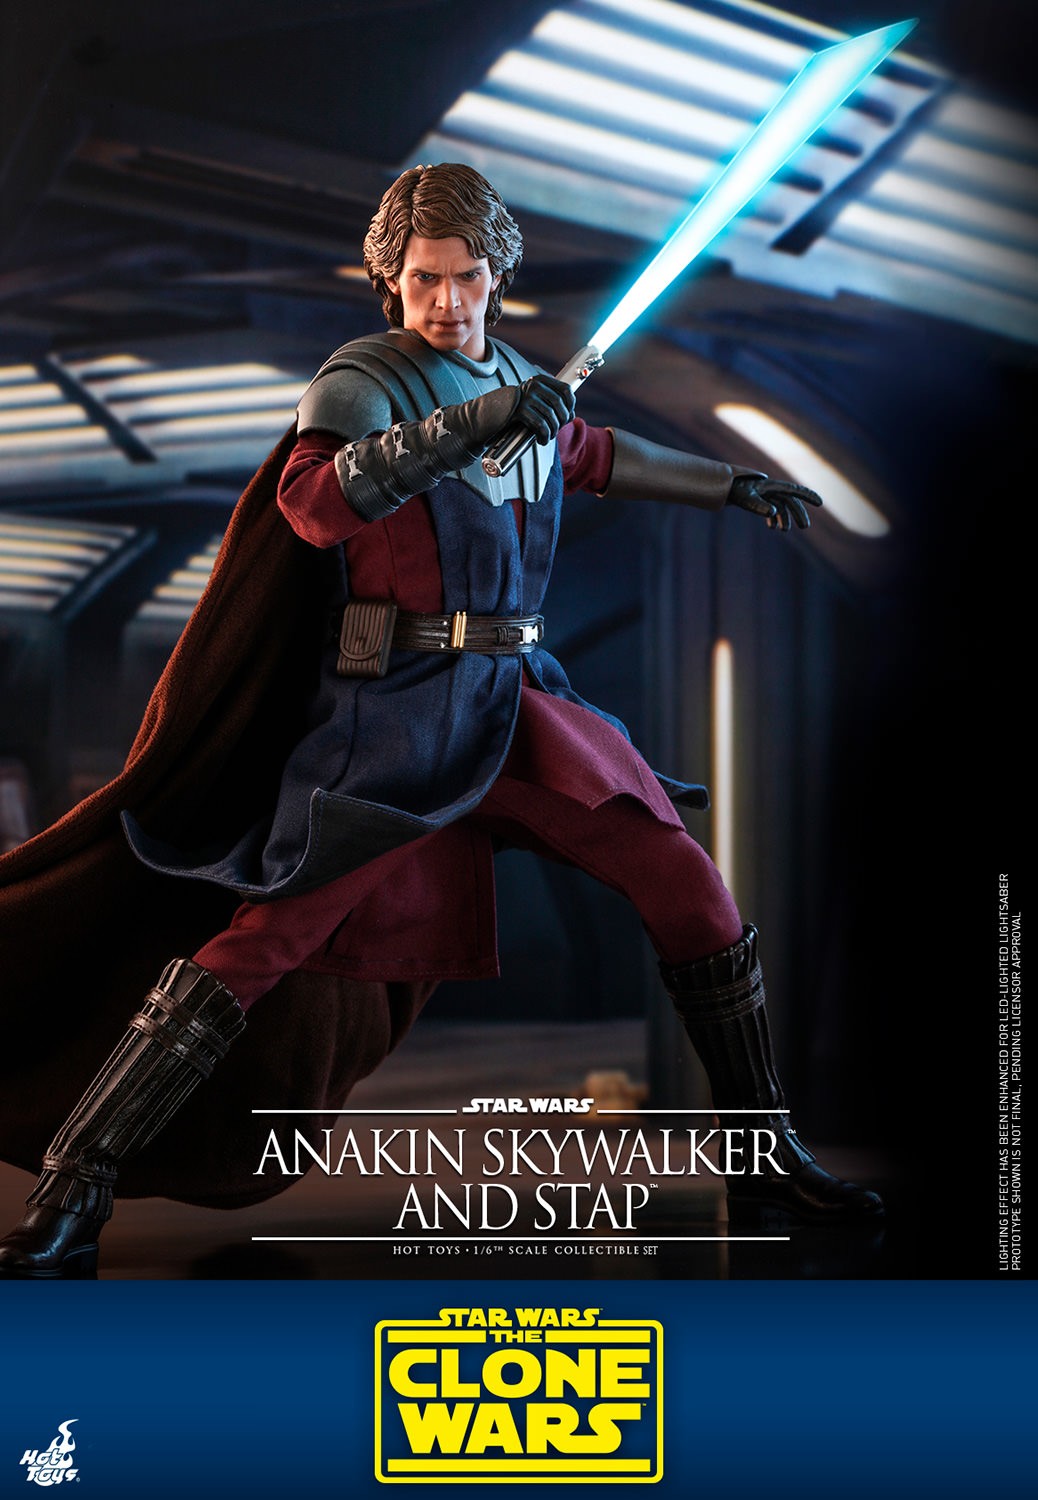 Anakin Skywalker and STAP (Special Edition) Exclusive Edition - Prototype Shown